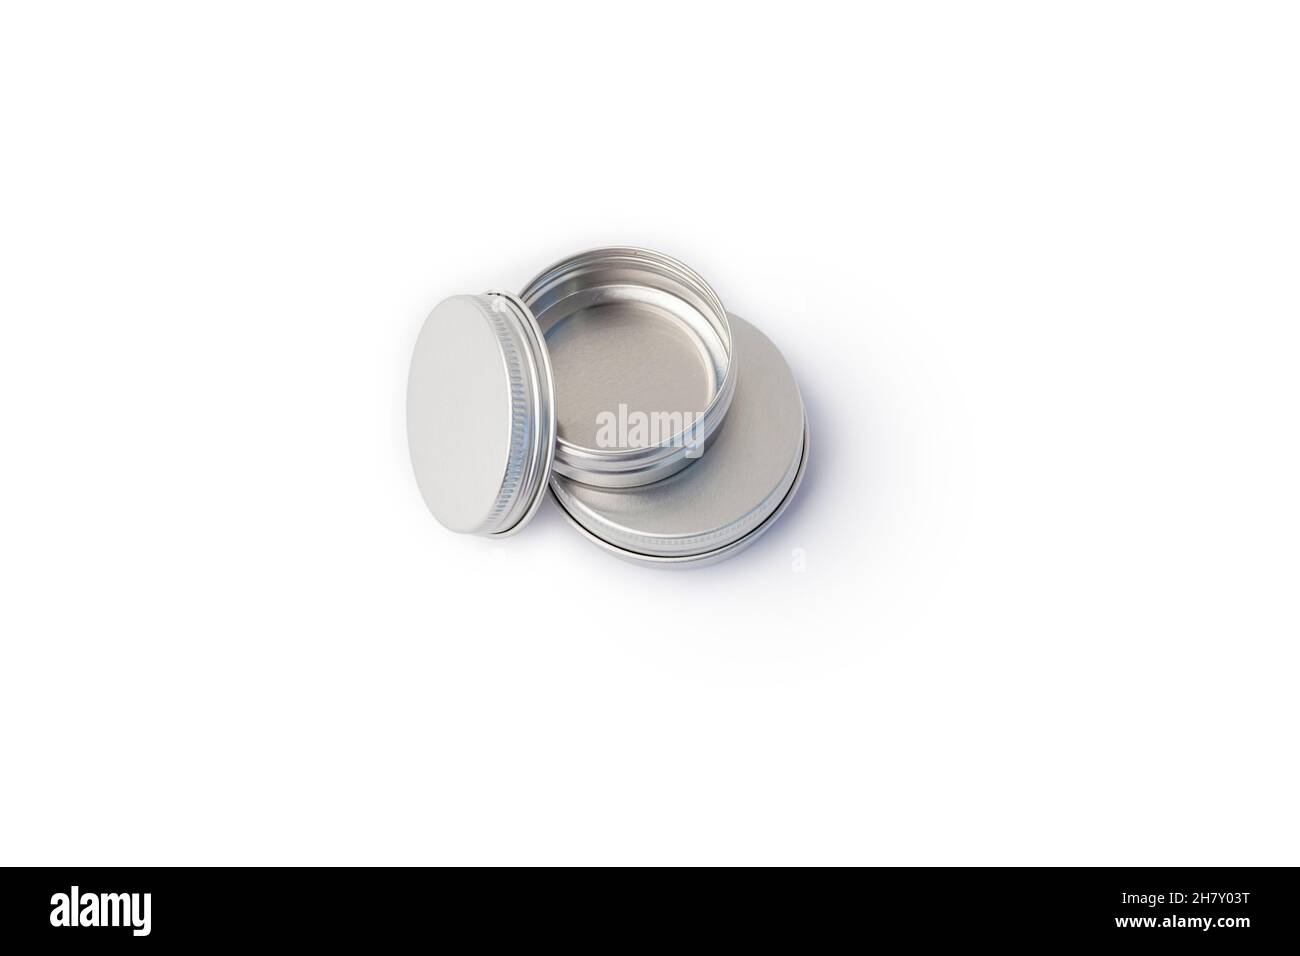 empty silver metal container for creme on white background Stock Photo